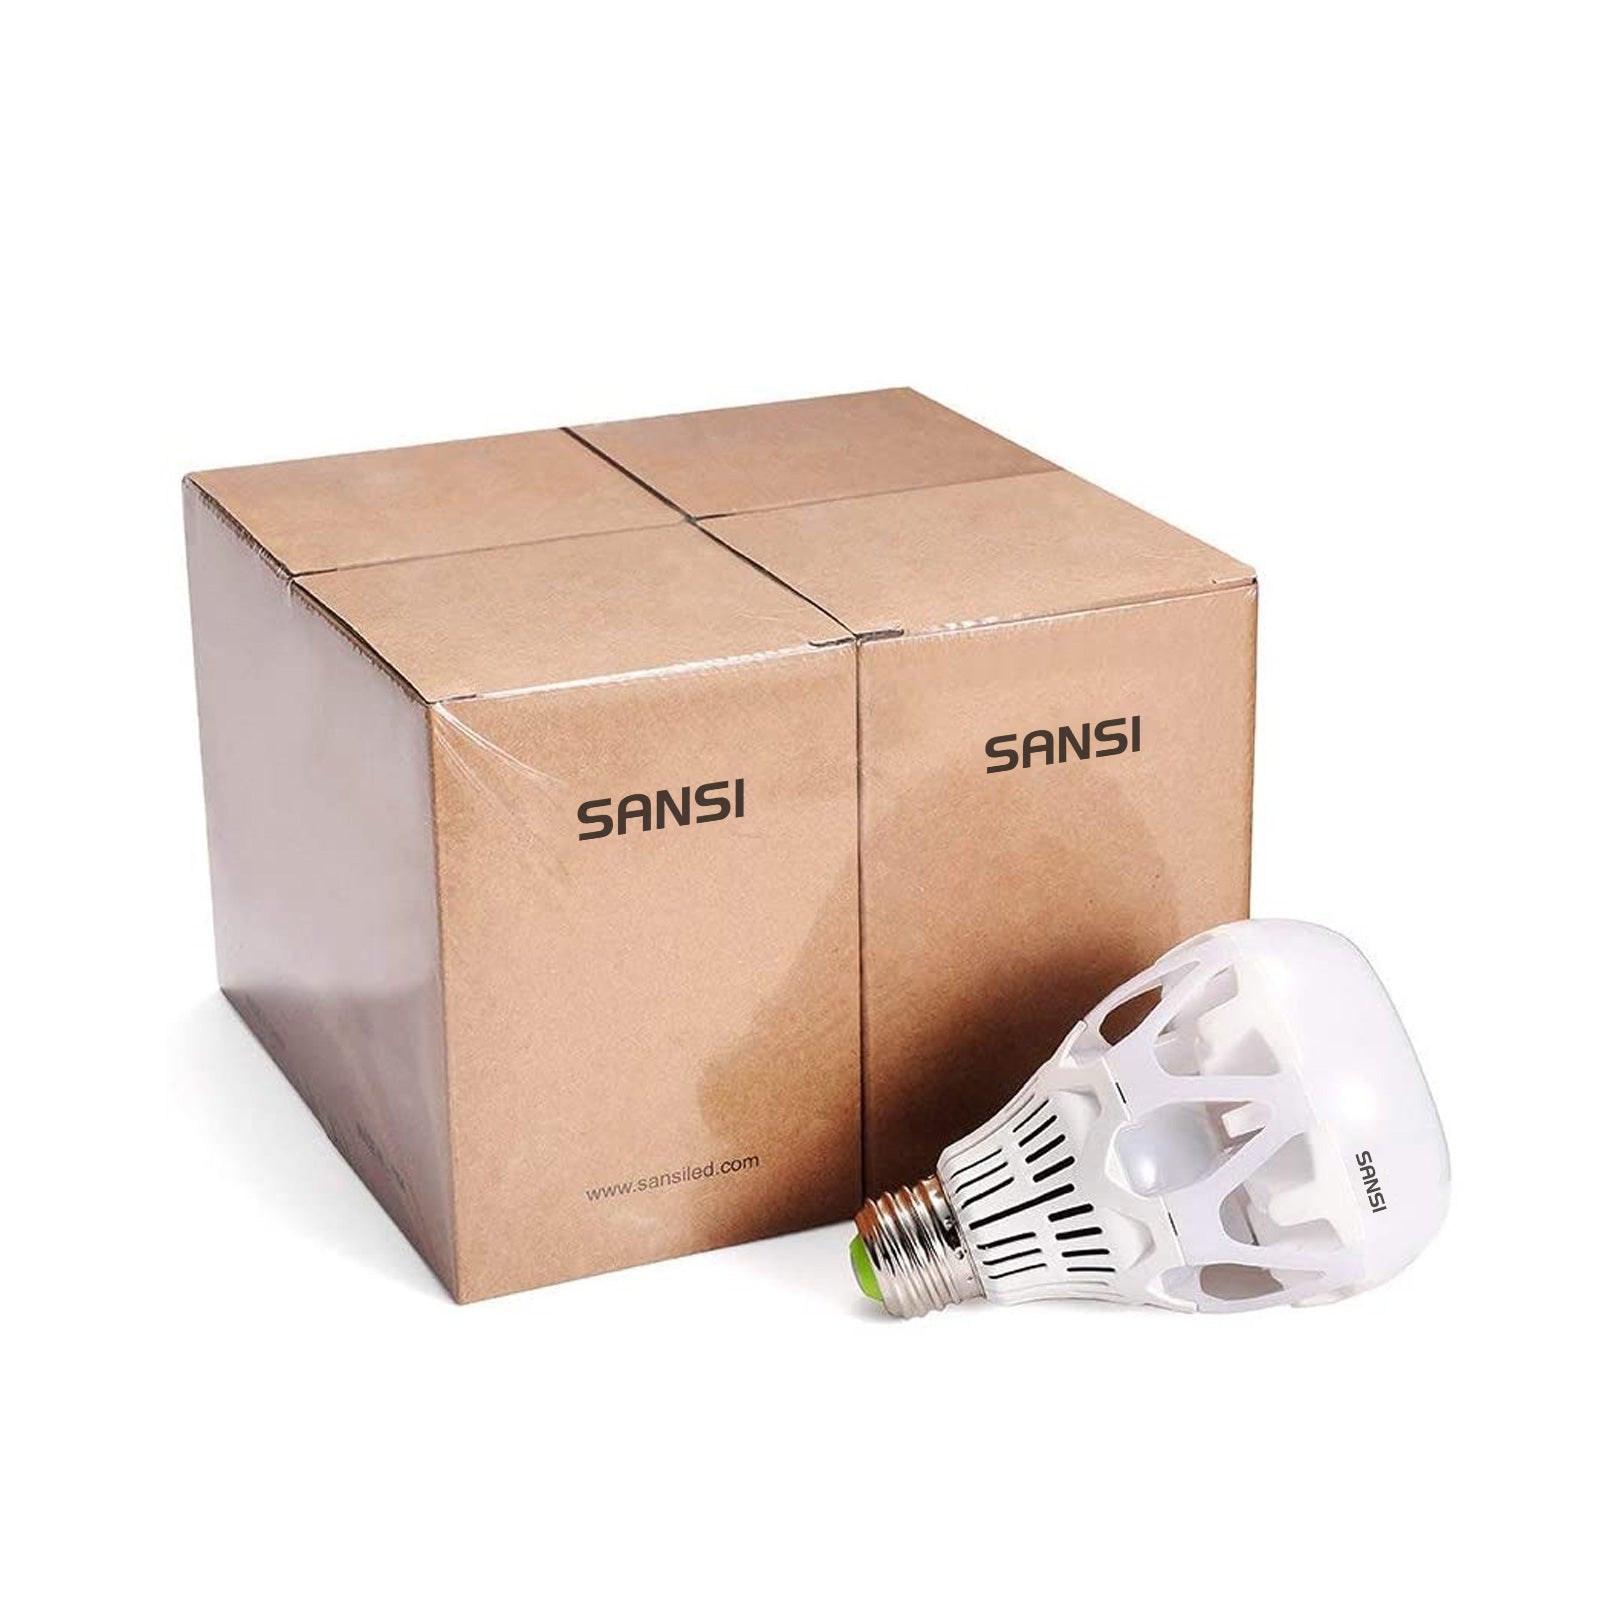 A21 18W led light bulb with energy saving for your home